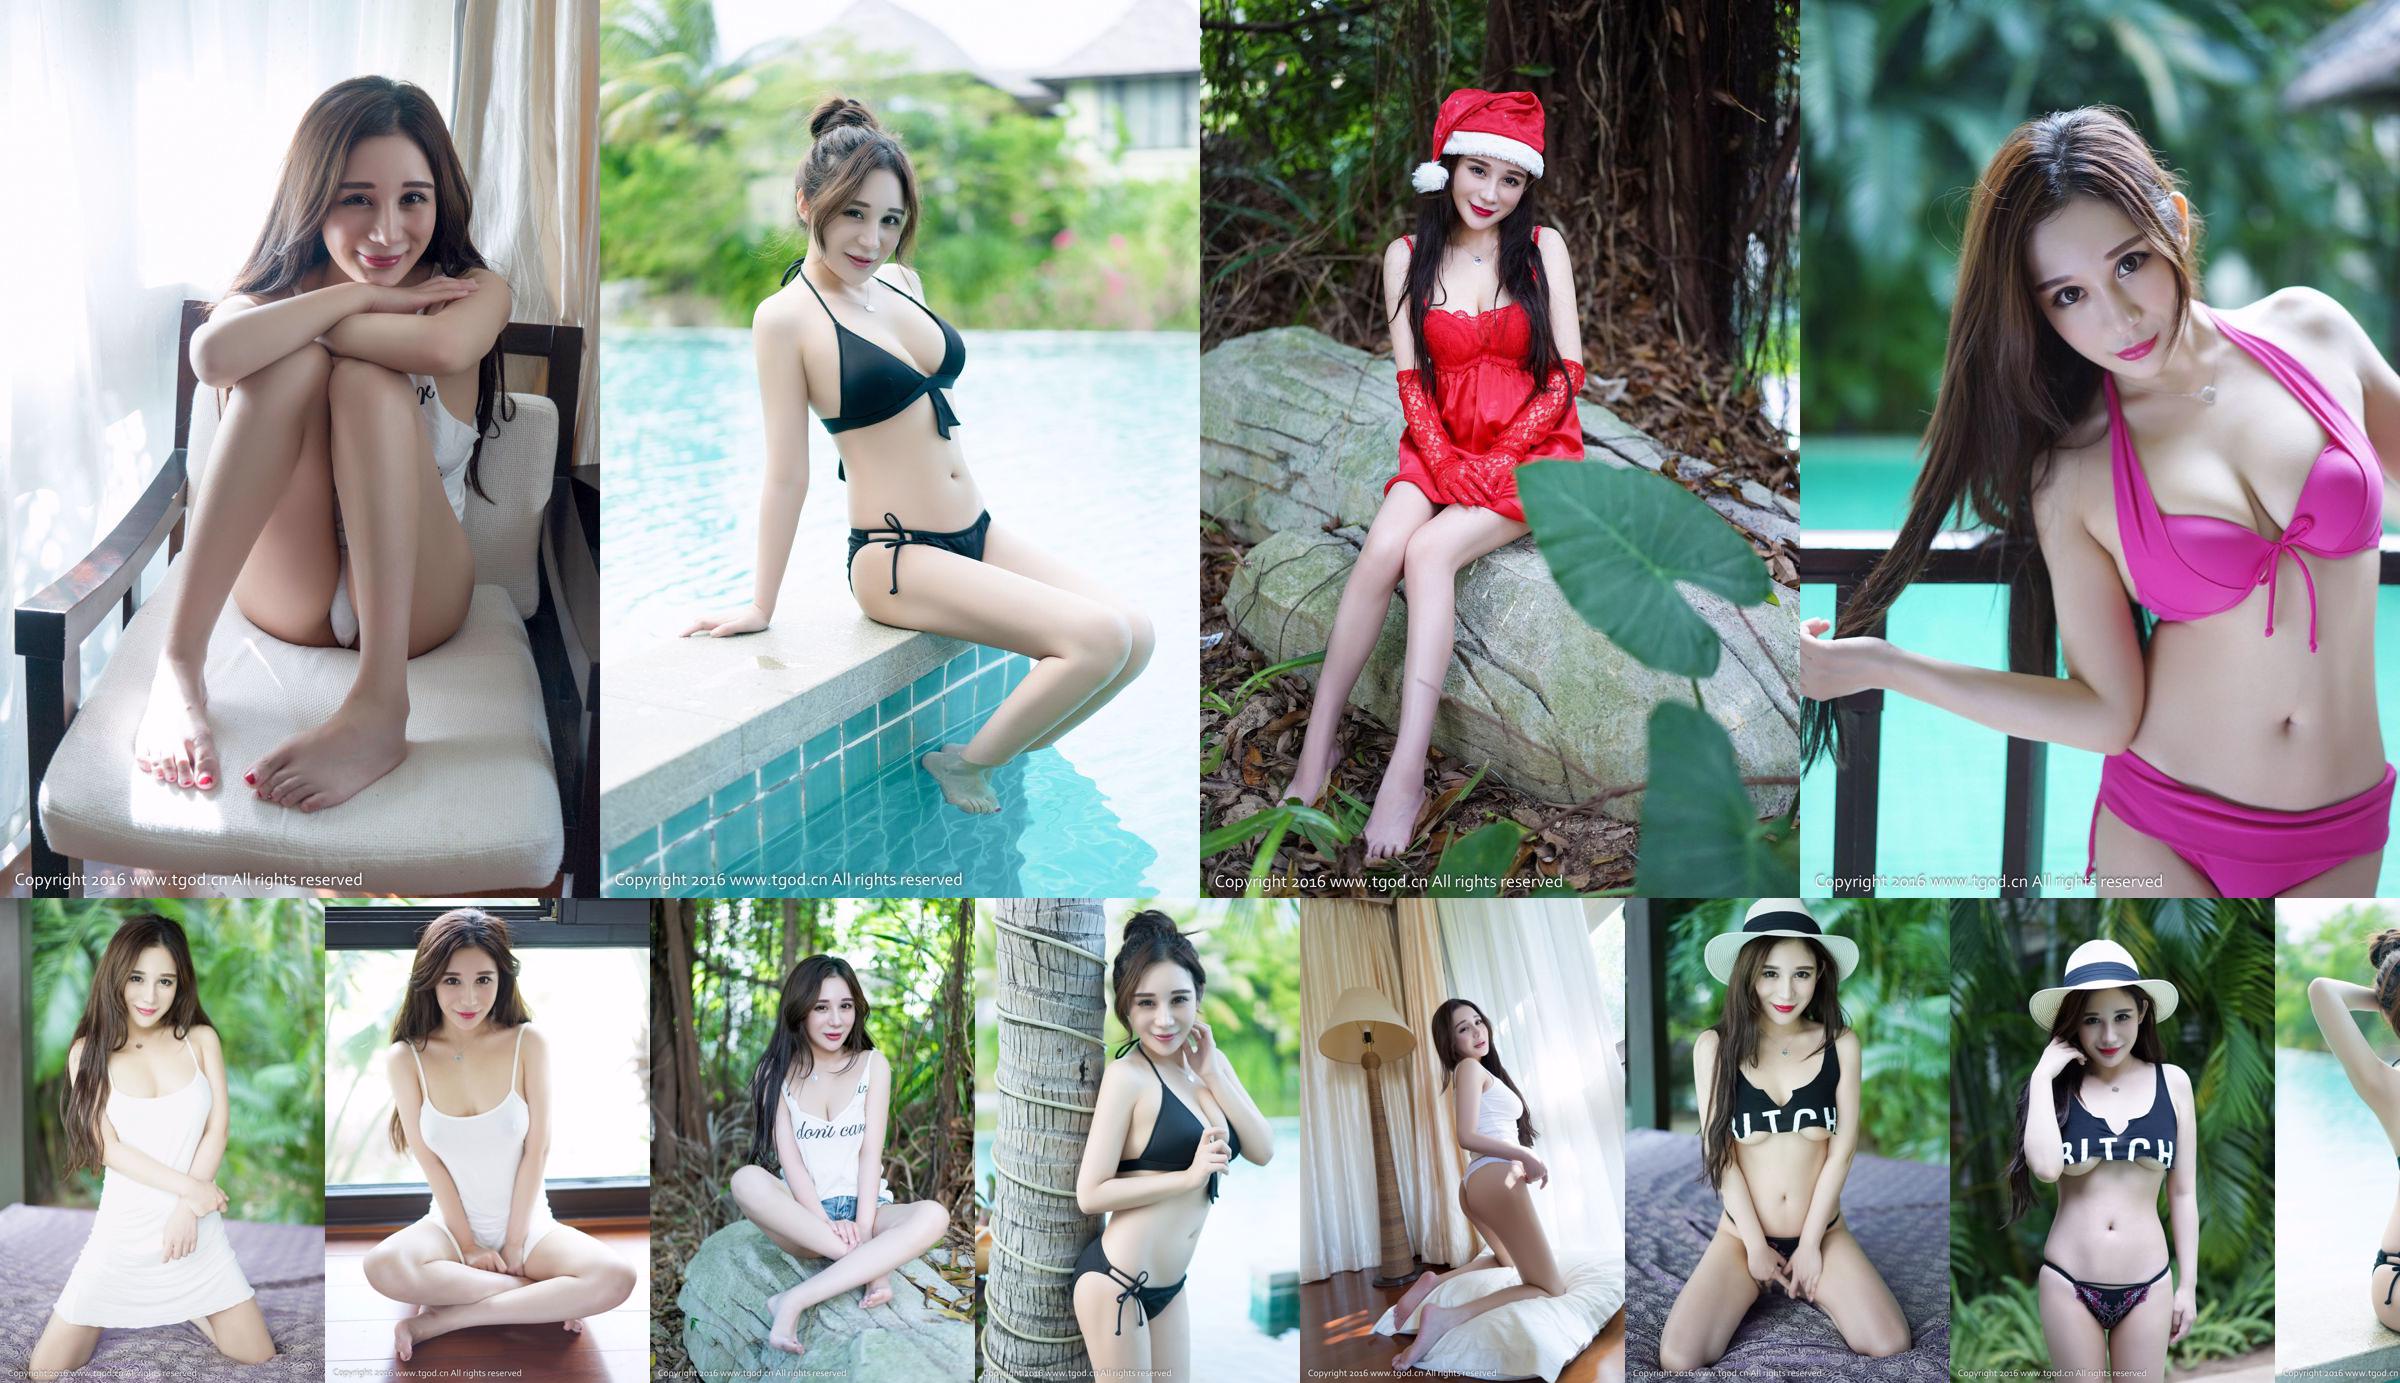 Chen Jiayao, AYomi's "Sanya Travel Shooting", fell in love with her at first sight [Push Goddess TGOD] No.4d5490 Page 12